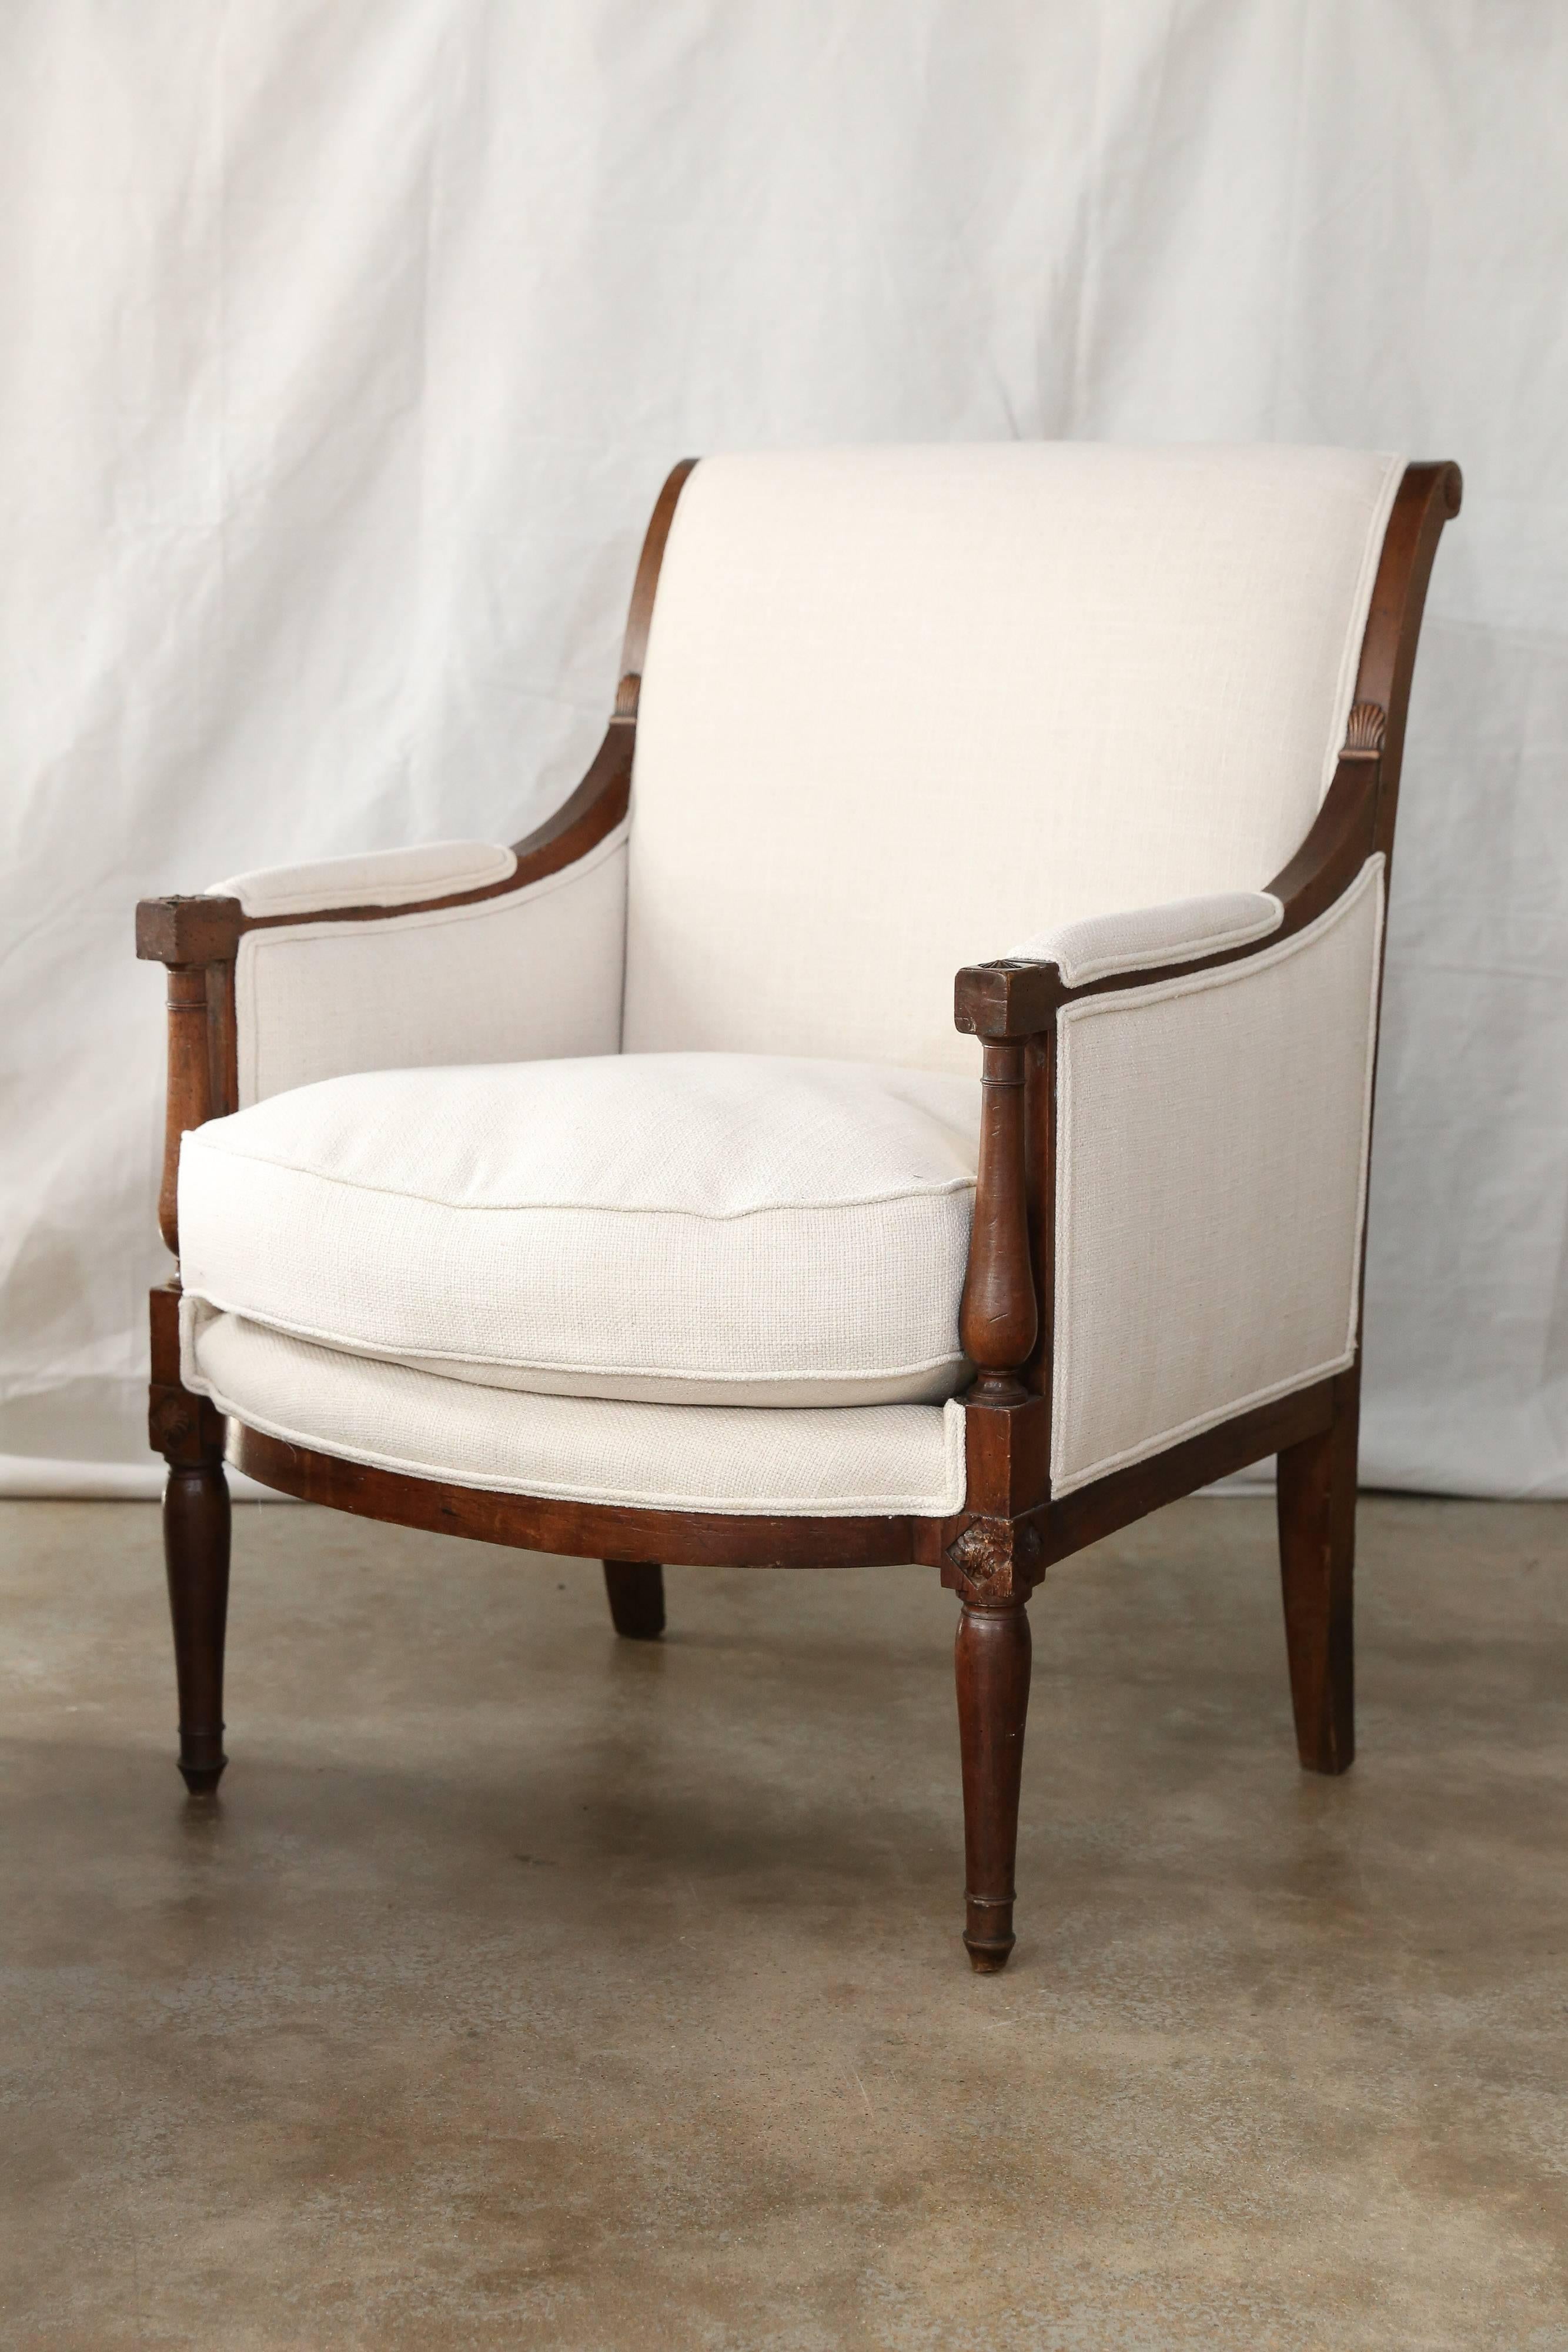 Elegant French duchesse brisee or chaise longue. In walnut, this graceful Directoire chaise has been completely reupholstered in off-white linen blend with down cushions.